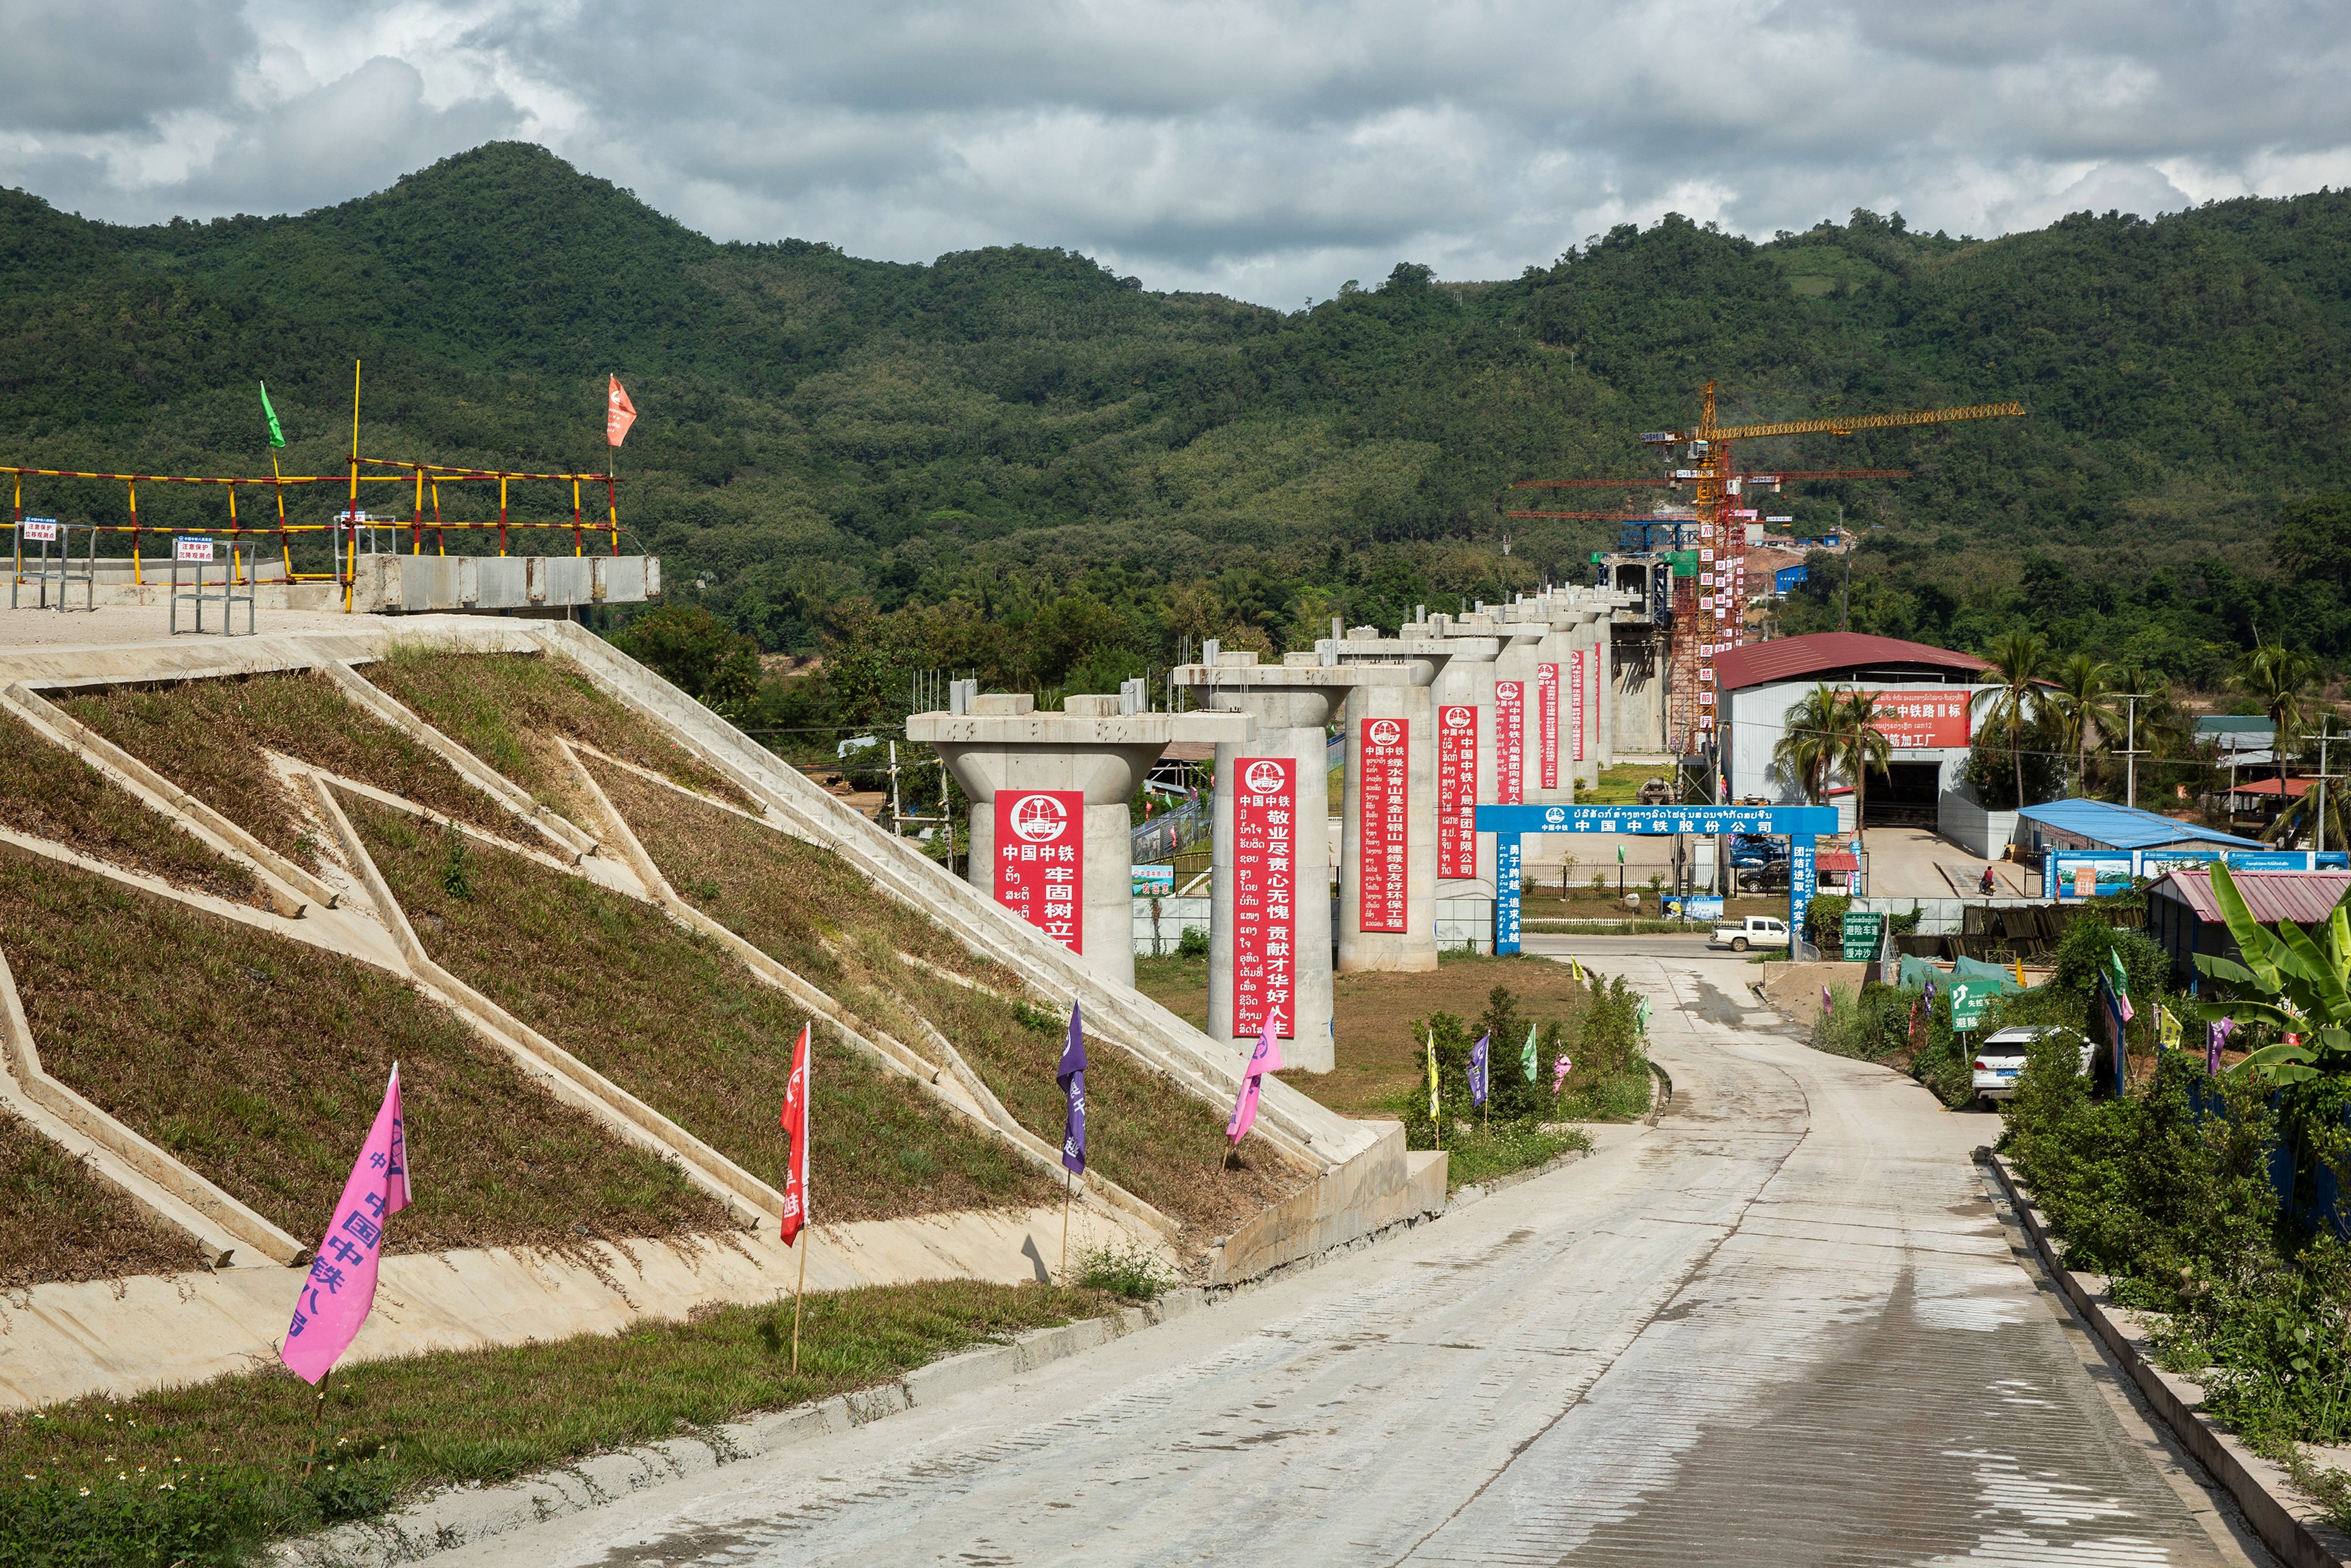 The piers for the Luang Prabang railway bridge, a section of the China-Laos Railway. Photo: Bloomberg